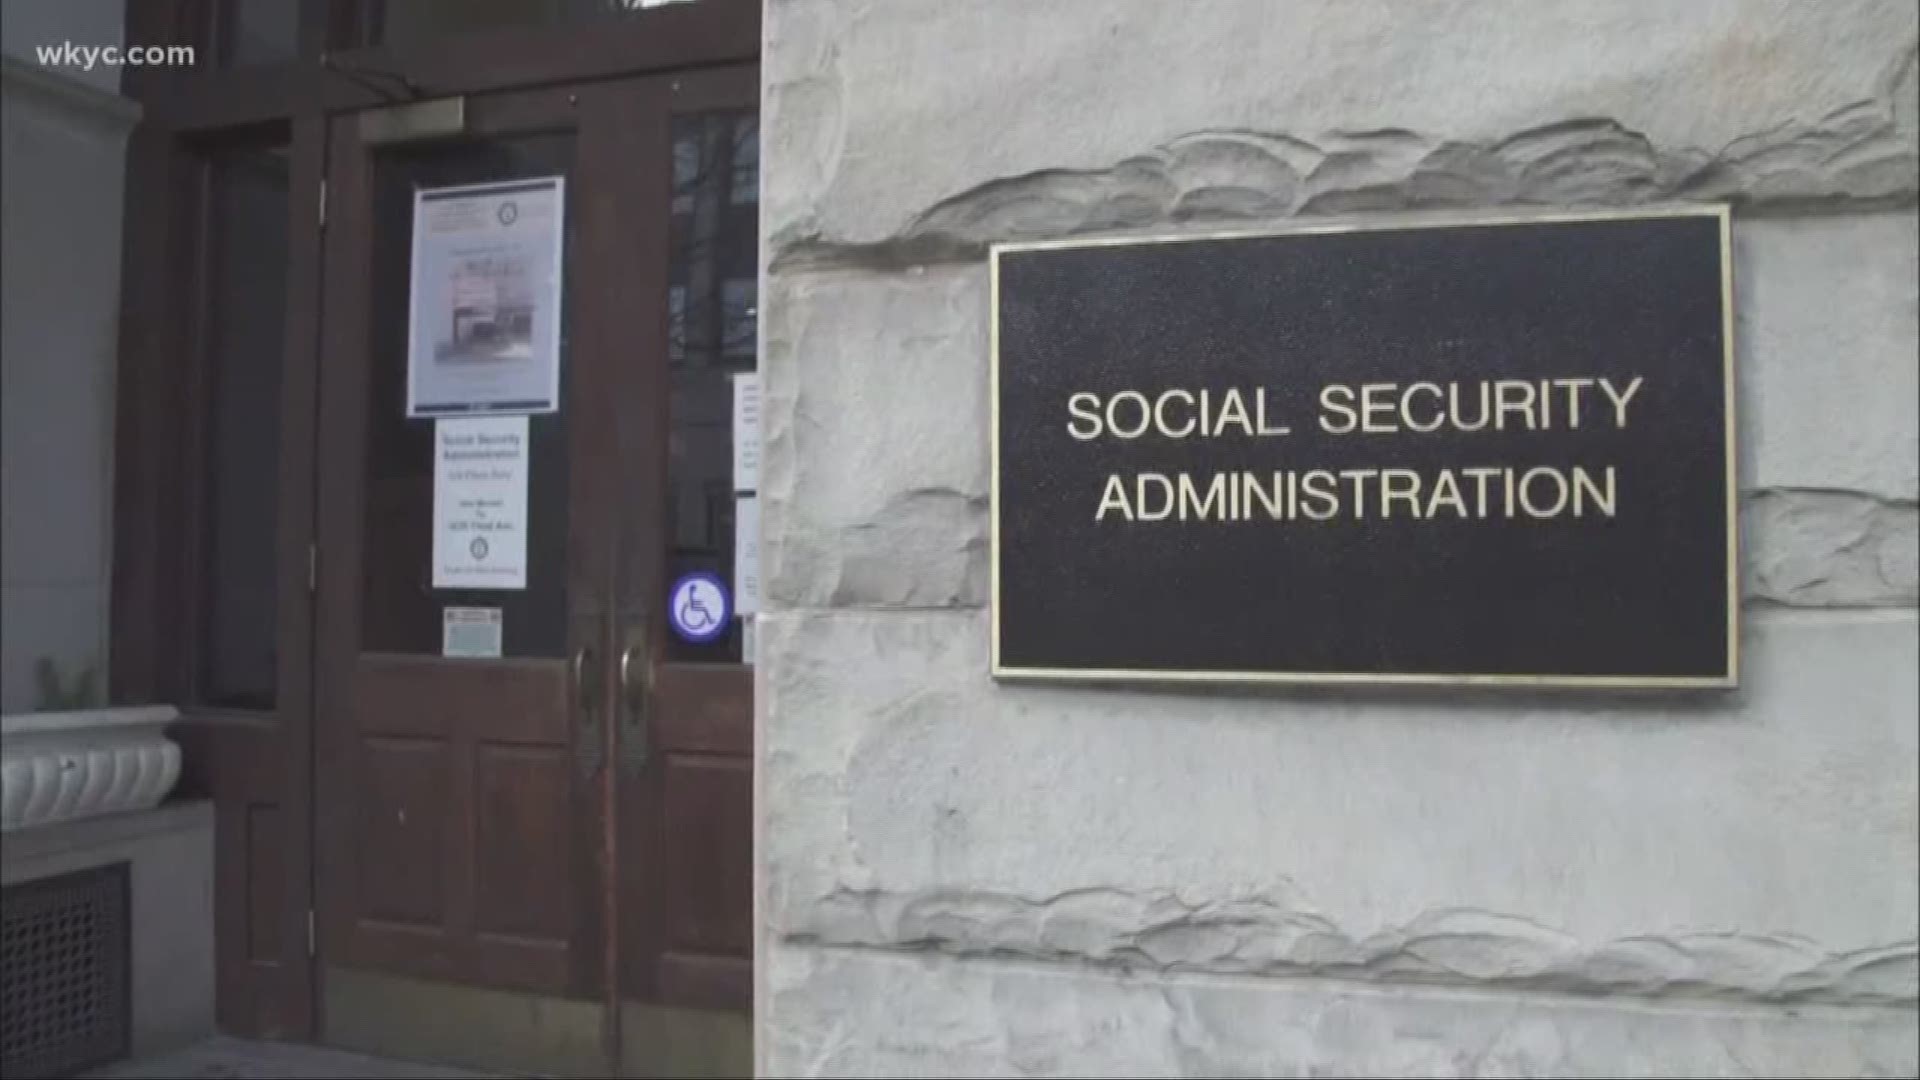 Social Security checks will grow in 2019 as inflation rises